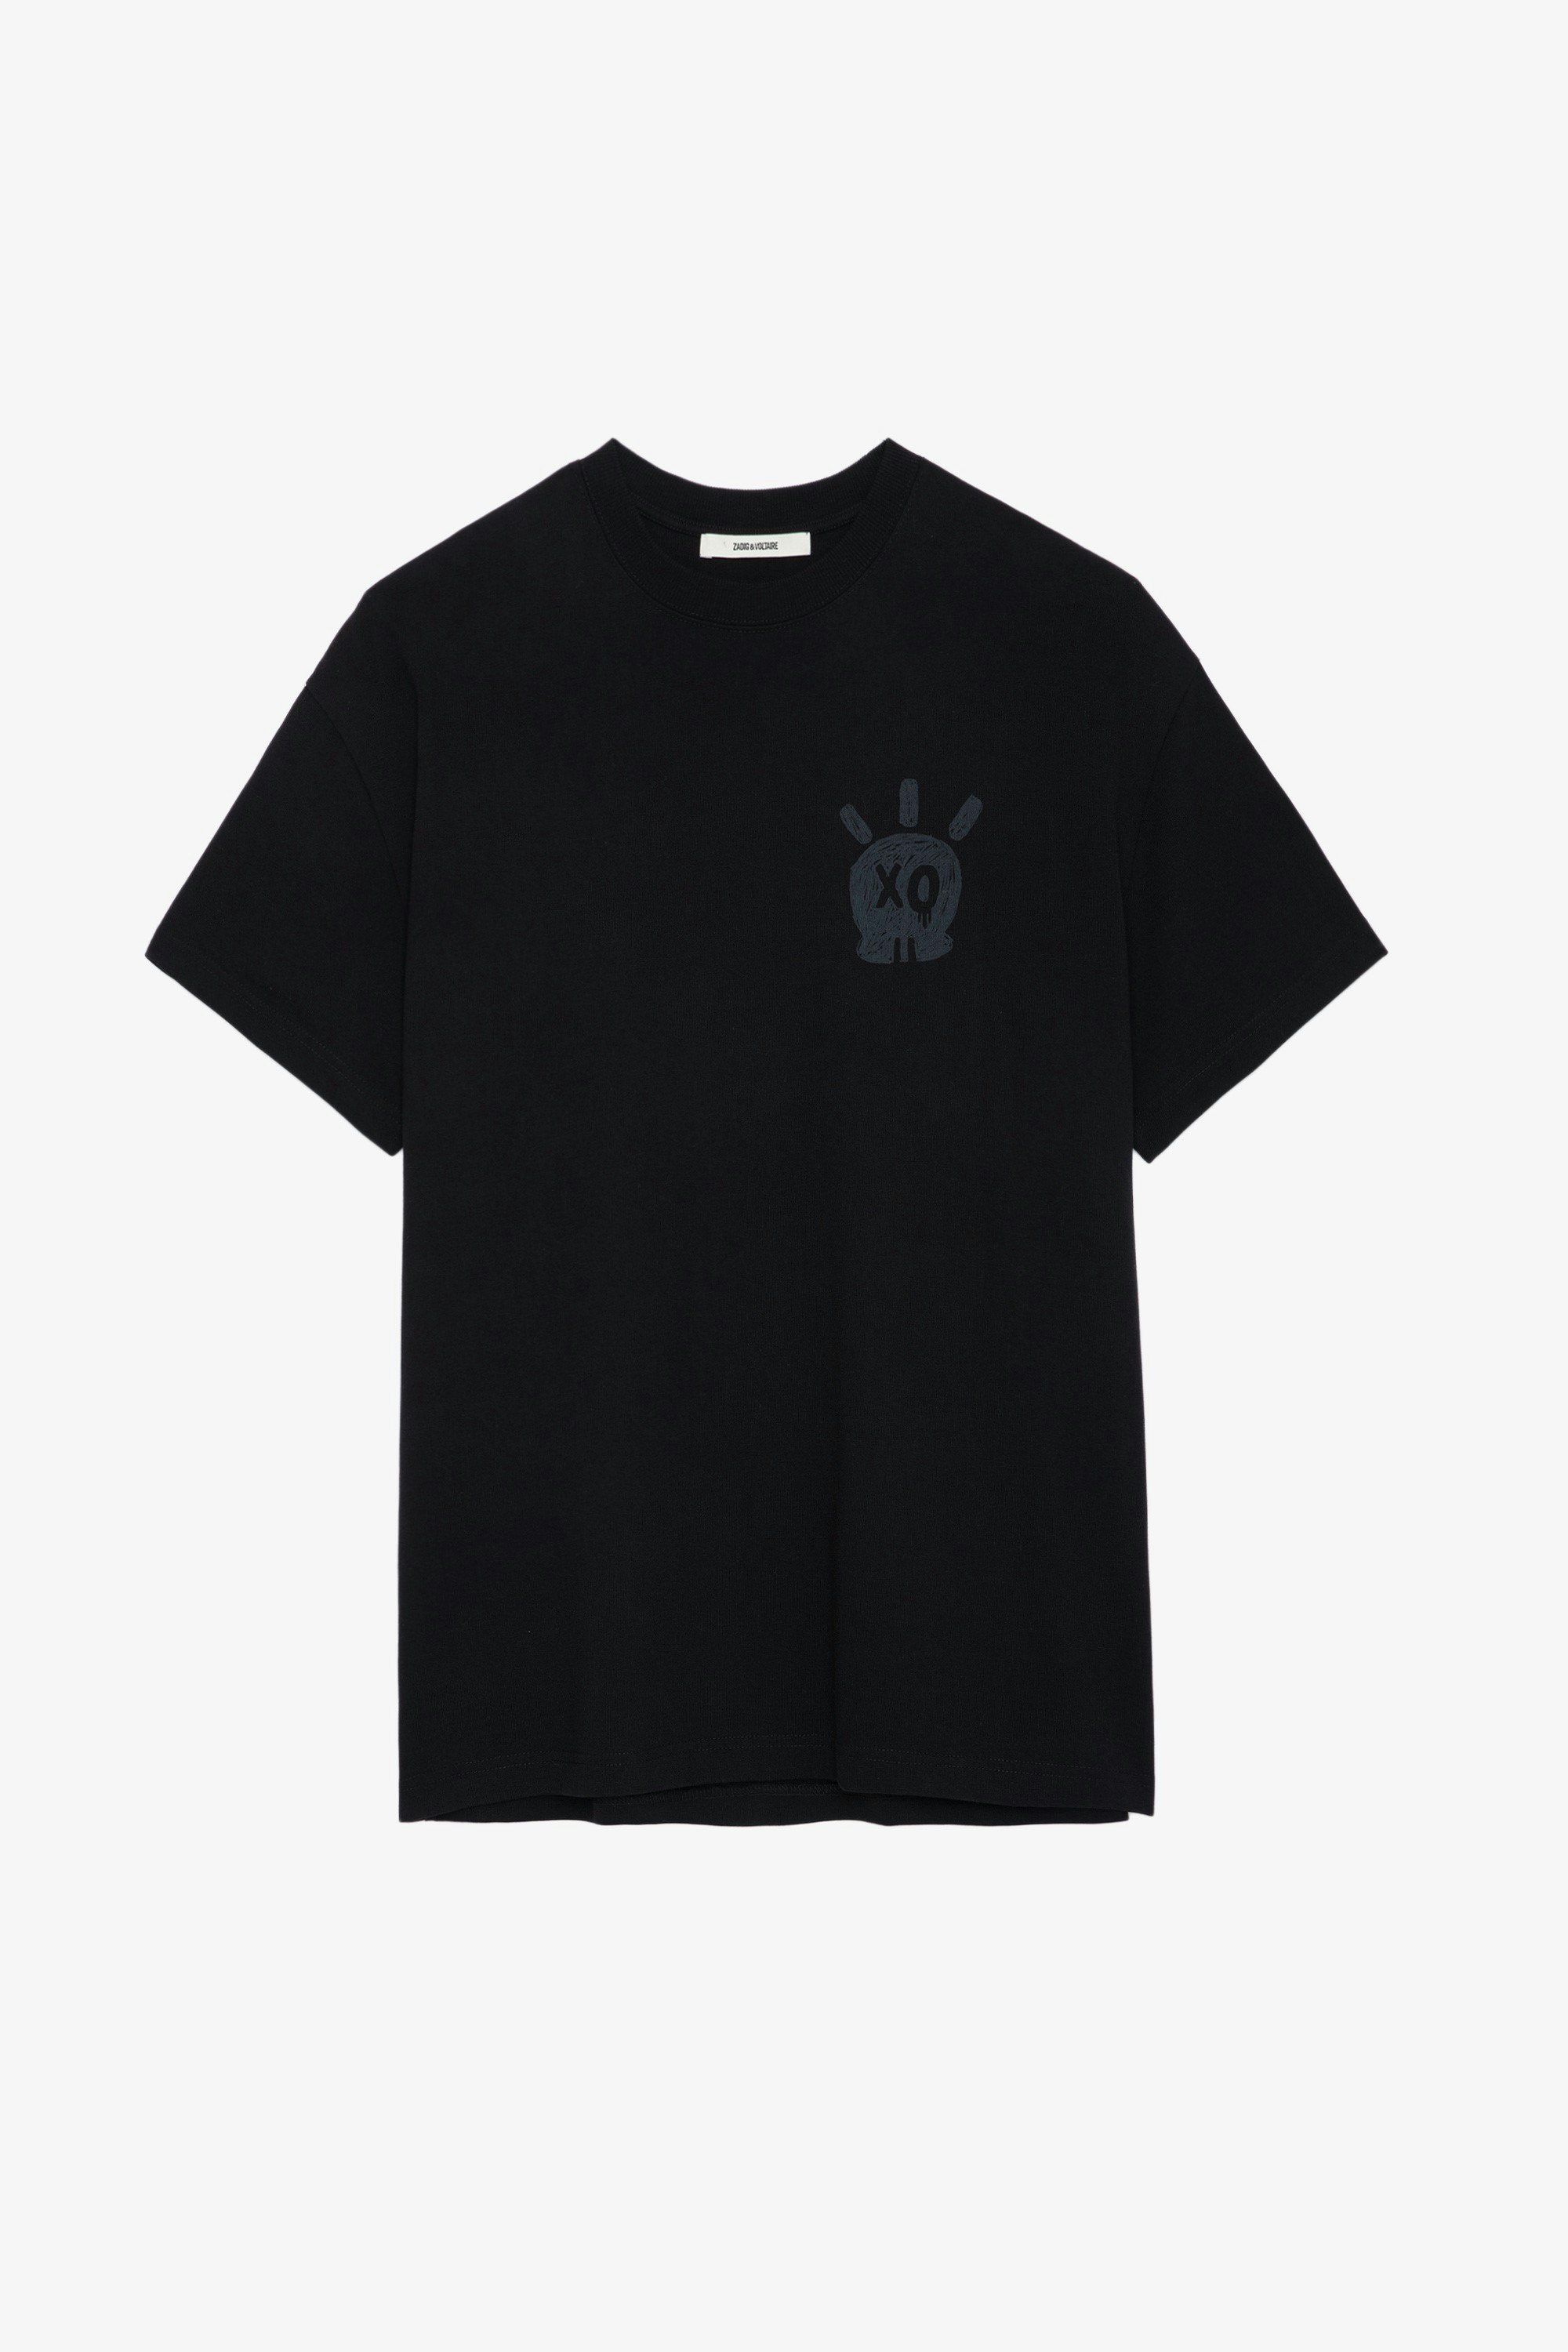 Teddy Skull T-shirt - Black cotton round-neck T-shirt with short sleeves and Skull XO print.